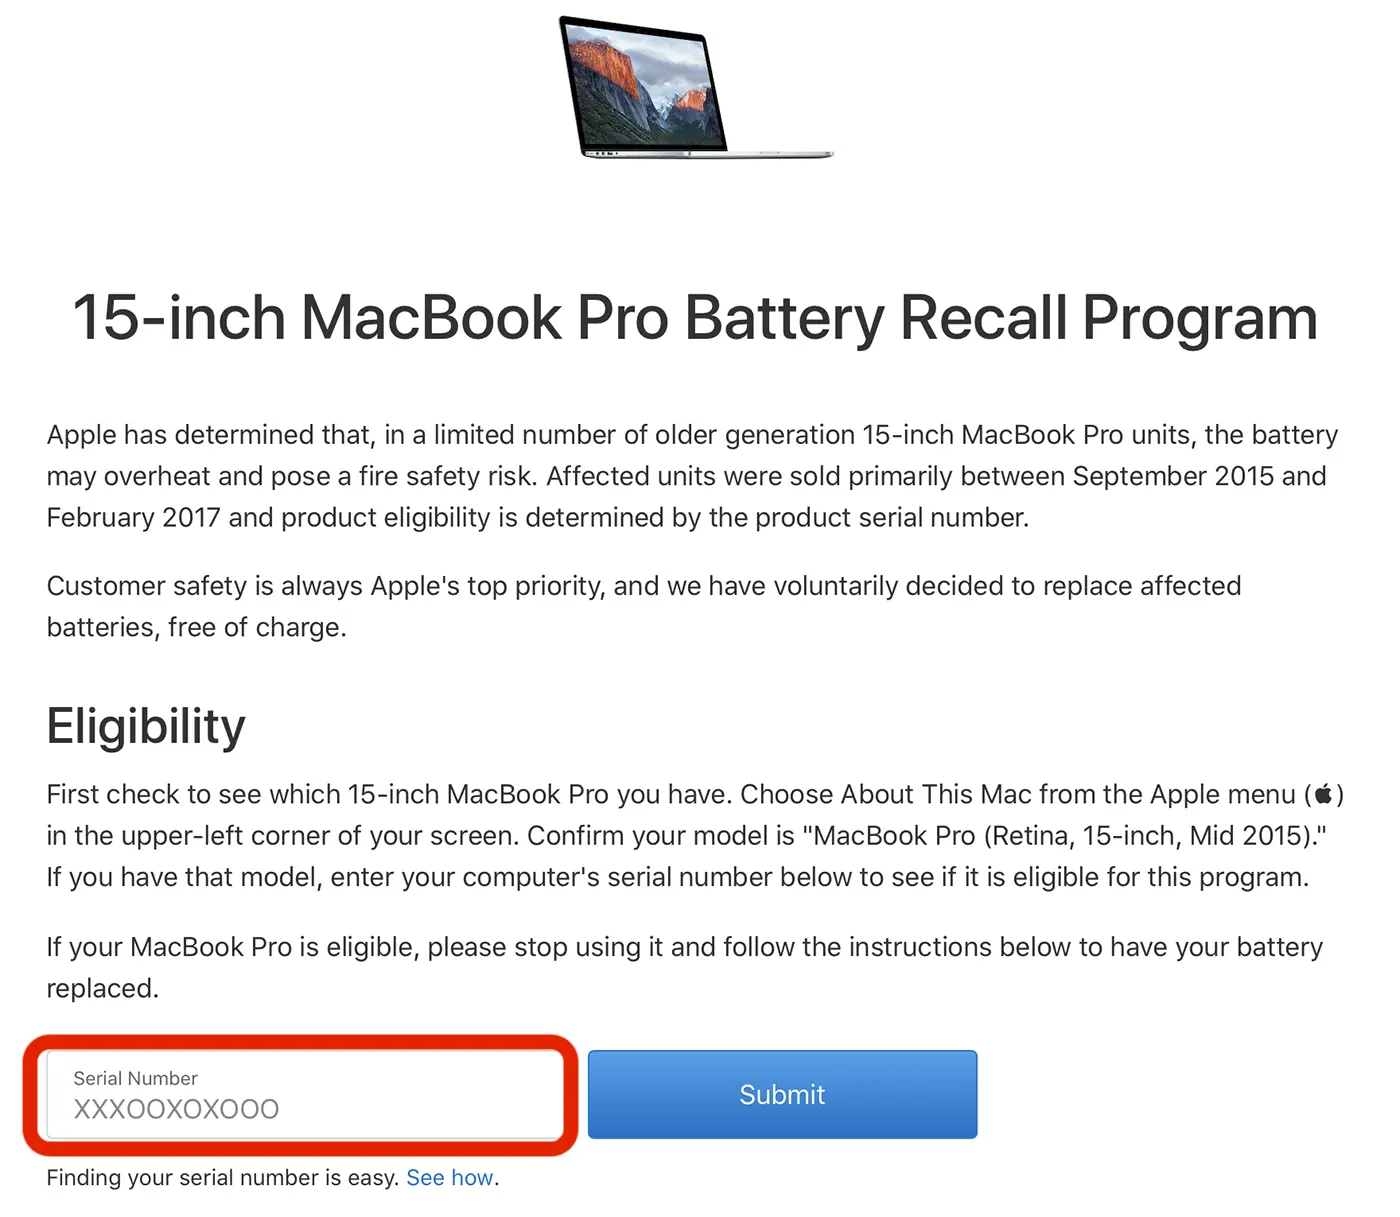 You can change your MacBook battery for free. See conditions